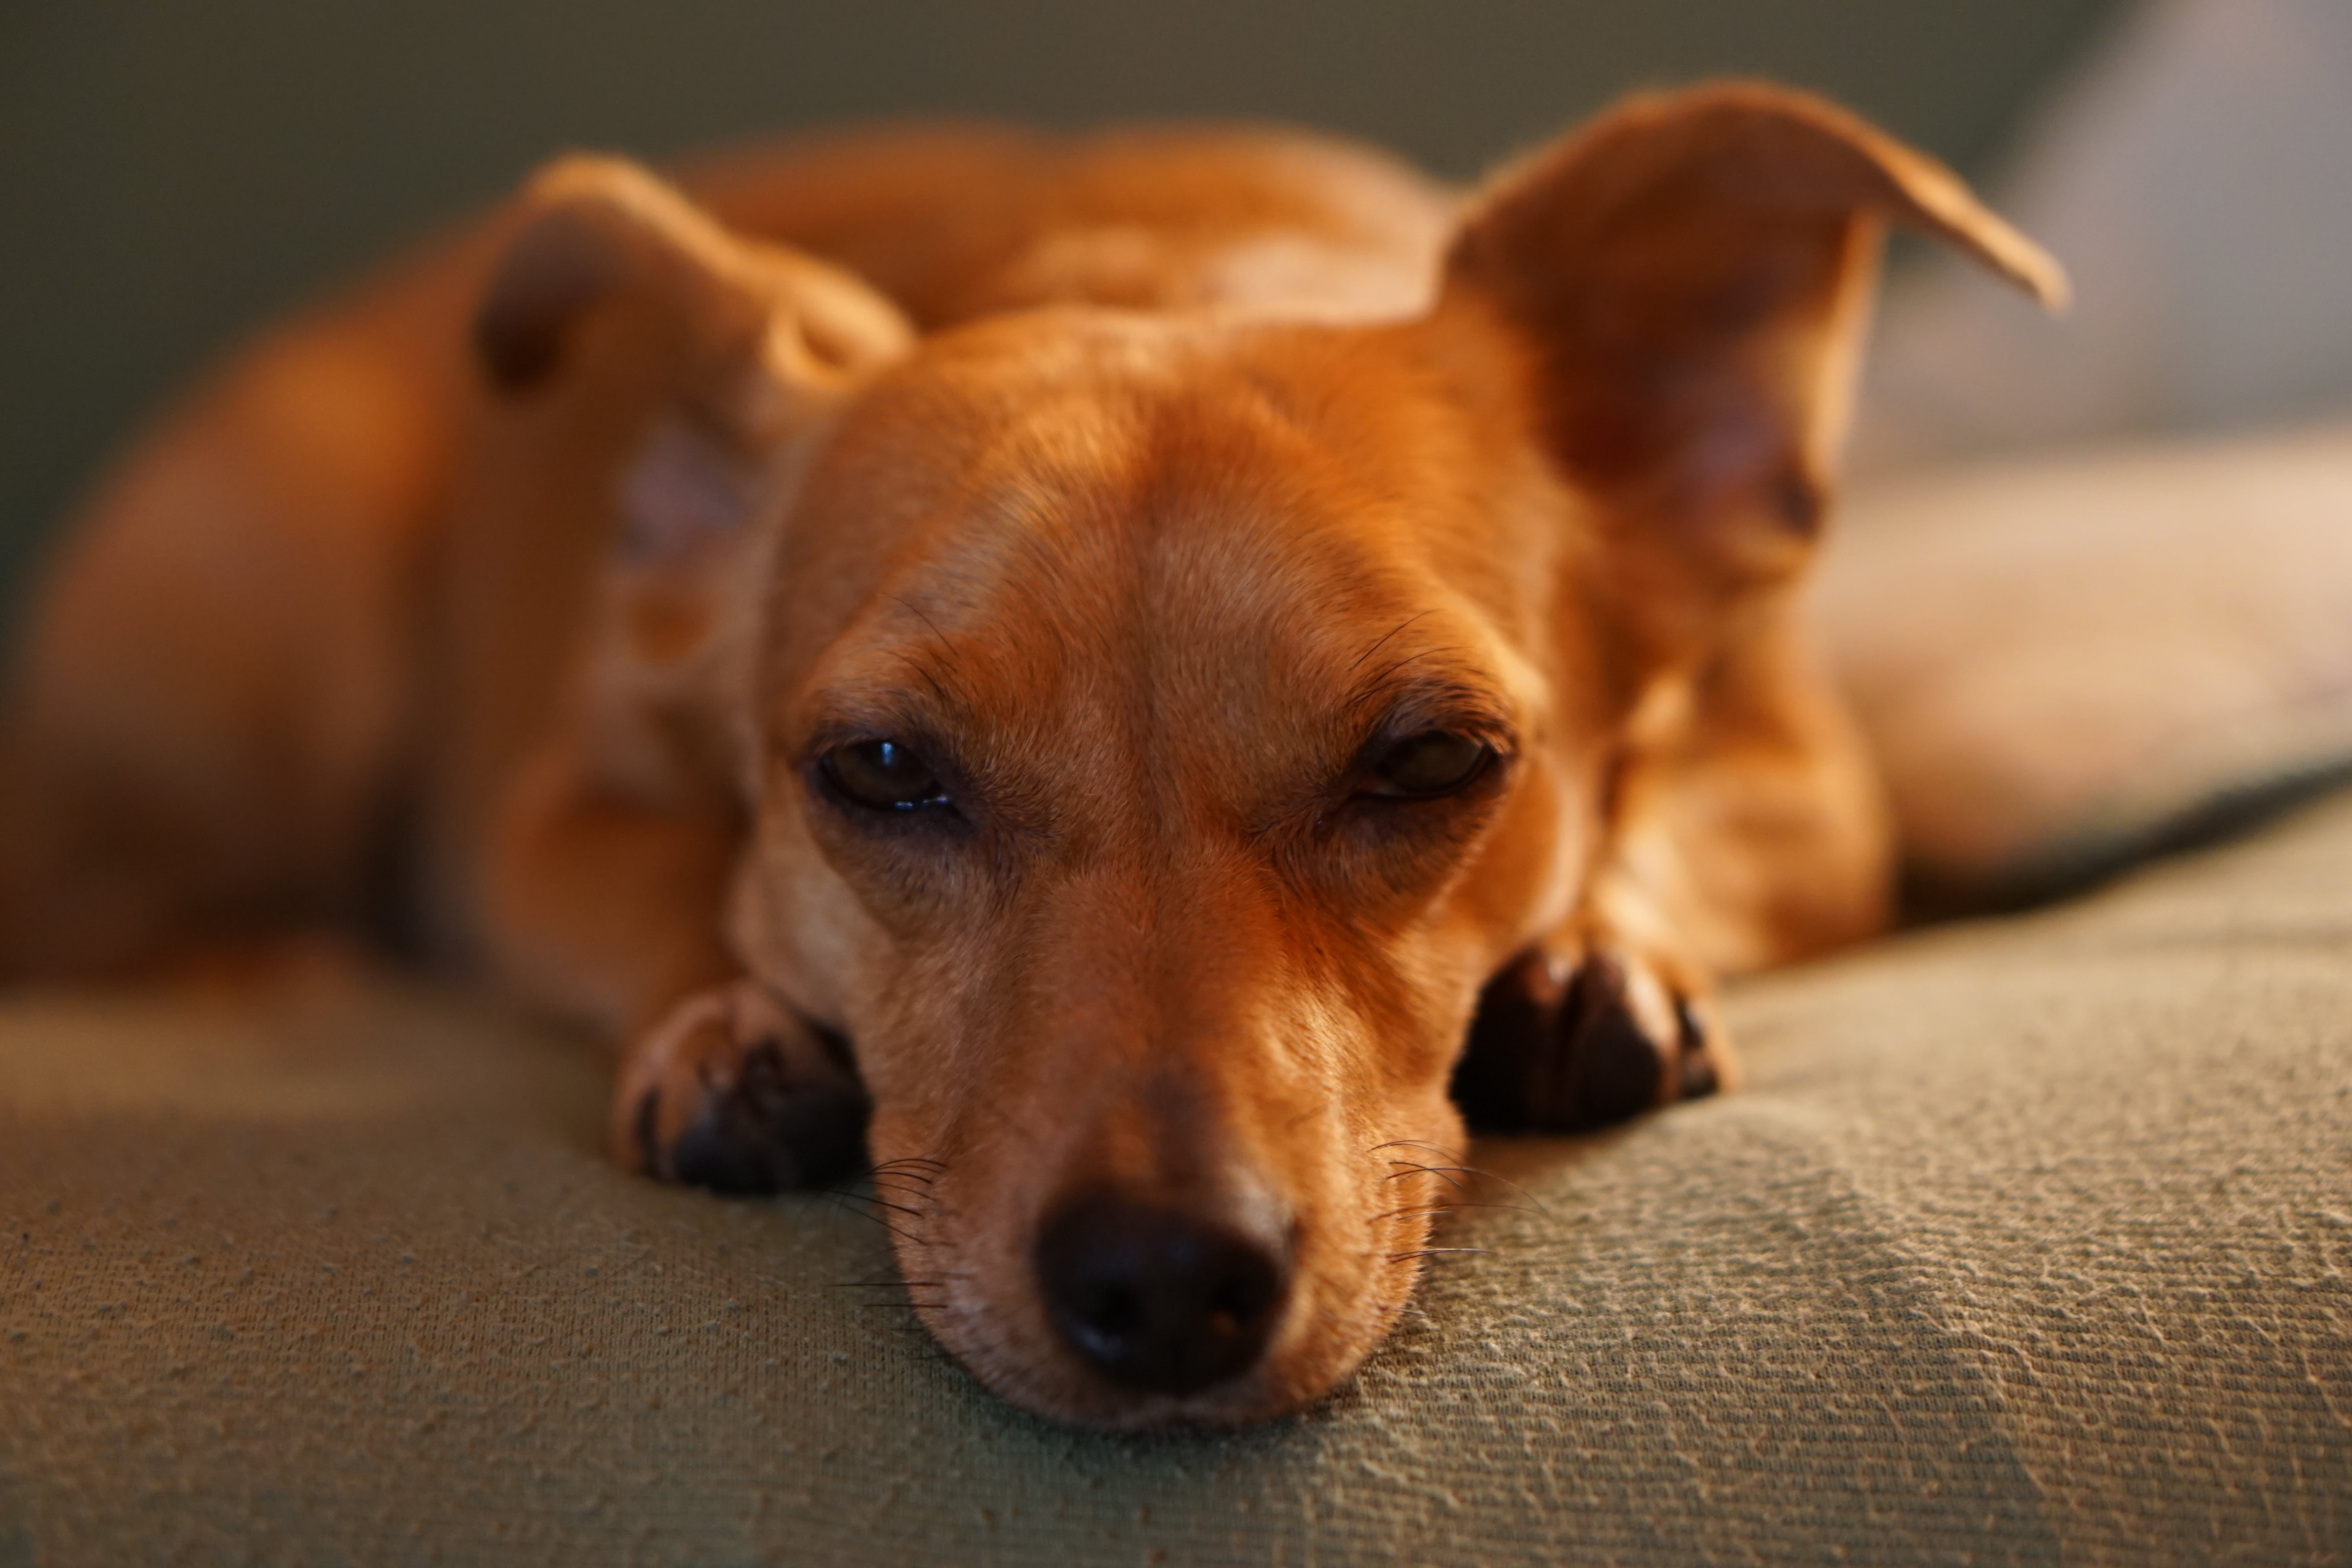 The unusual tilting of the head is a common sign of a dog brain tumor.